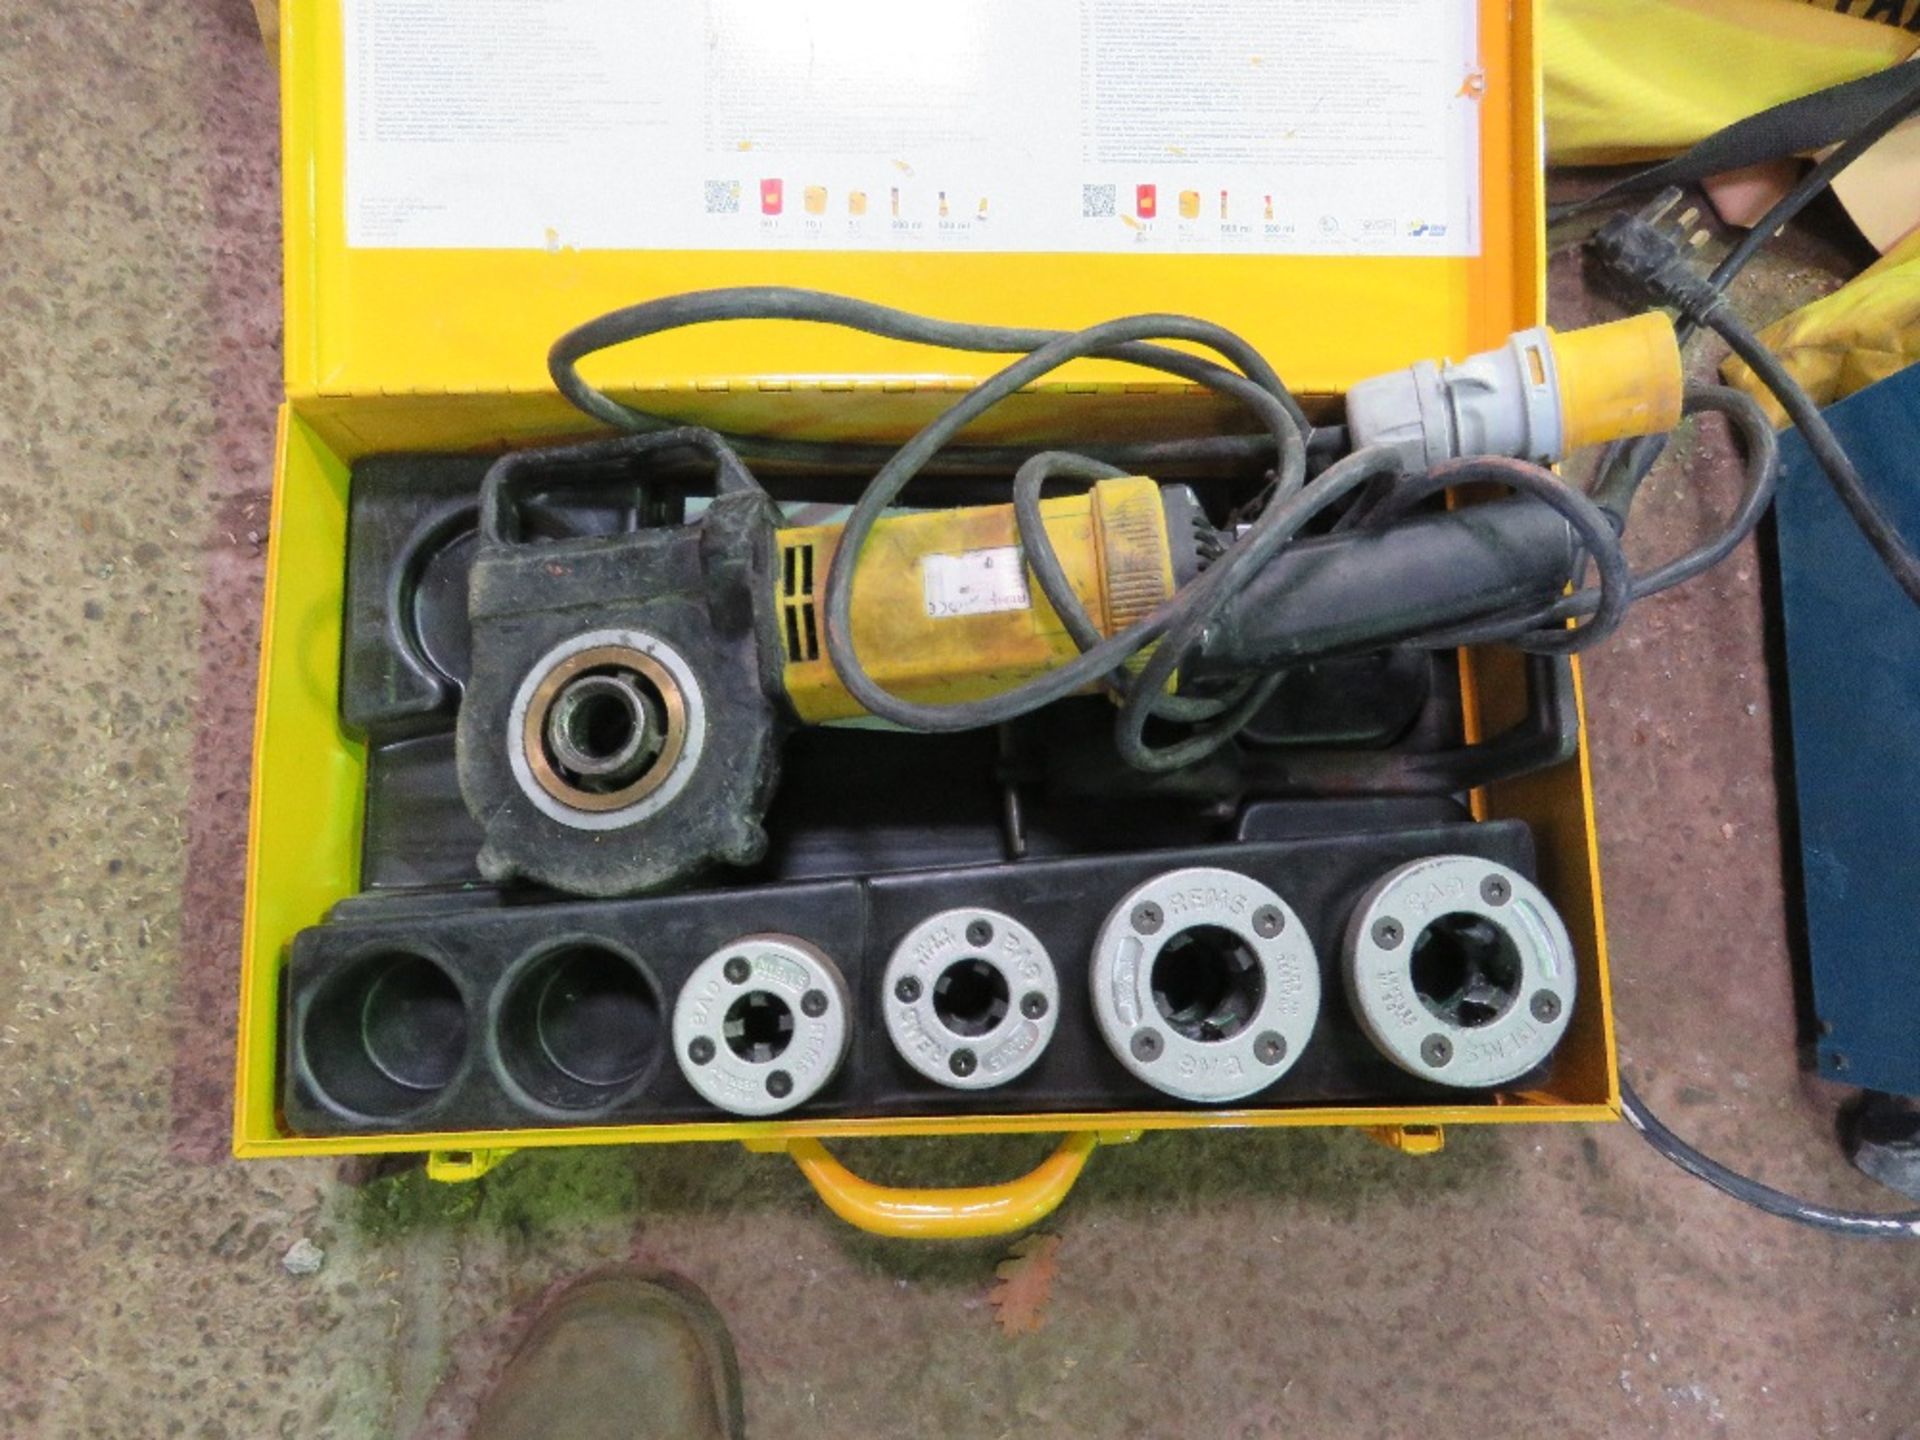 REMS AMIGO 110V PIPE THREADER SET IN BOX SOURCED FROM LARGE CONSTRUCTION COMPANY LIQUIDATION. - Image 3 of 3